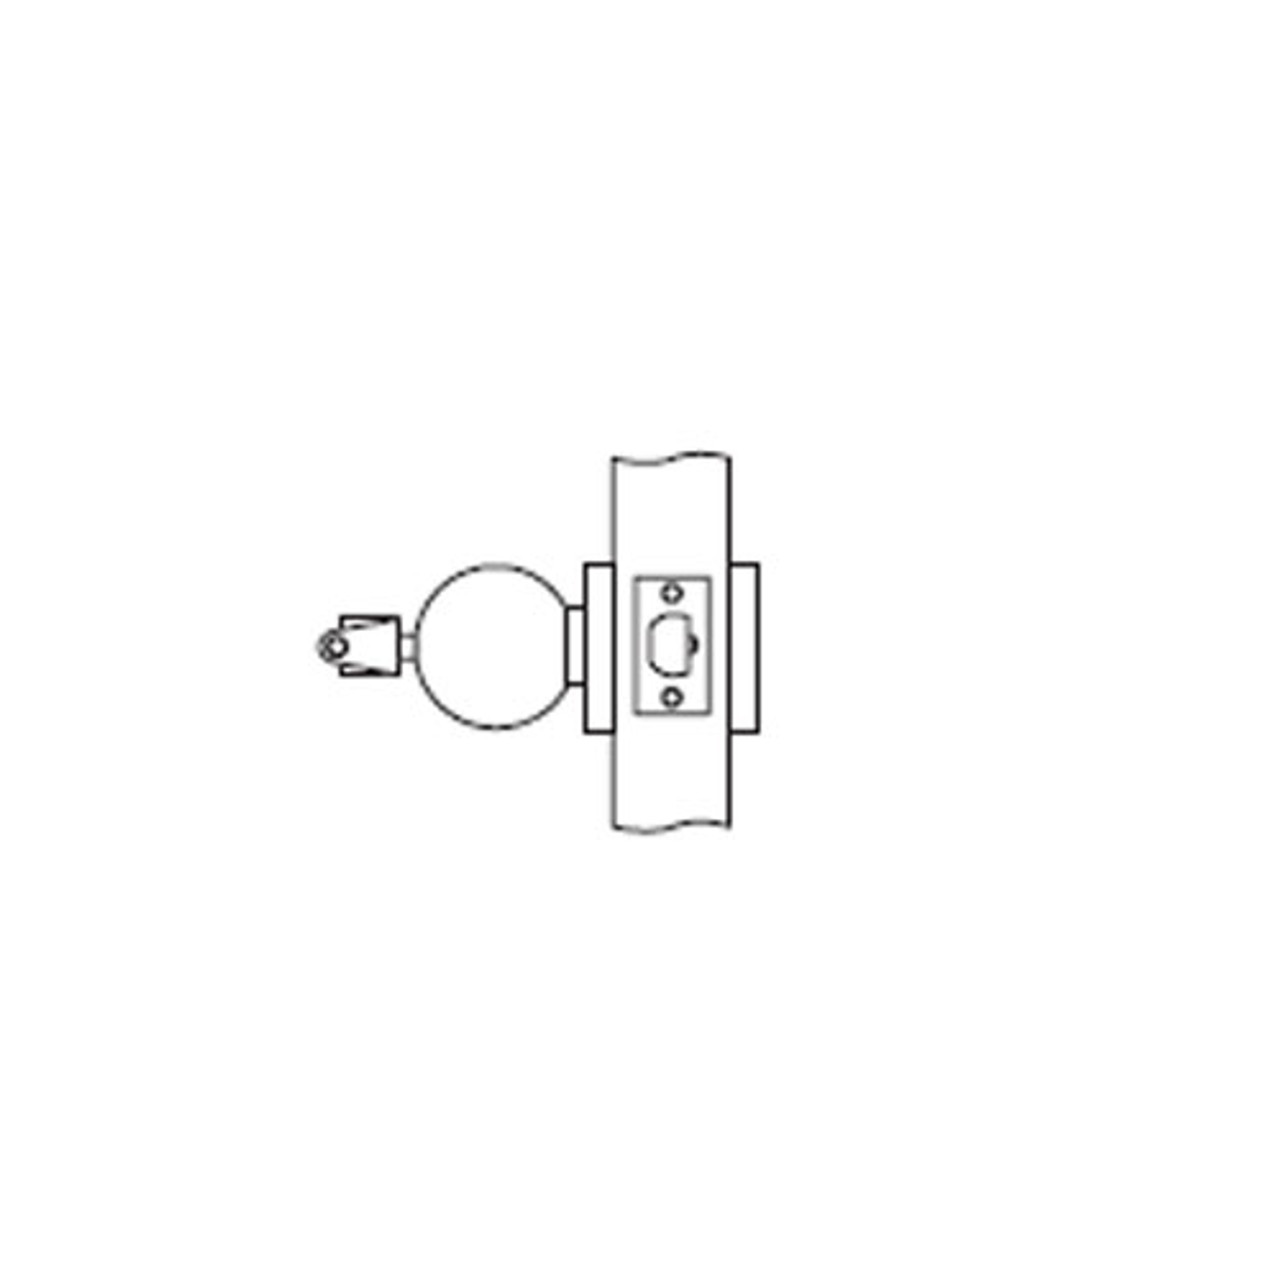 MK18-TA-05A Arrow Lock MK Series Cylindrical Locksets Single Cylinder for Communicating Classroom with TA Knob in Antique Brass